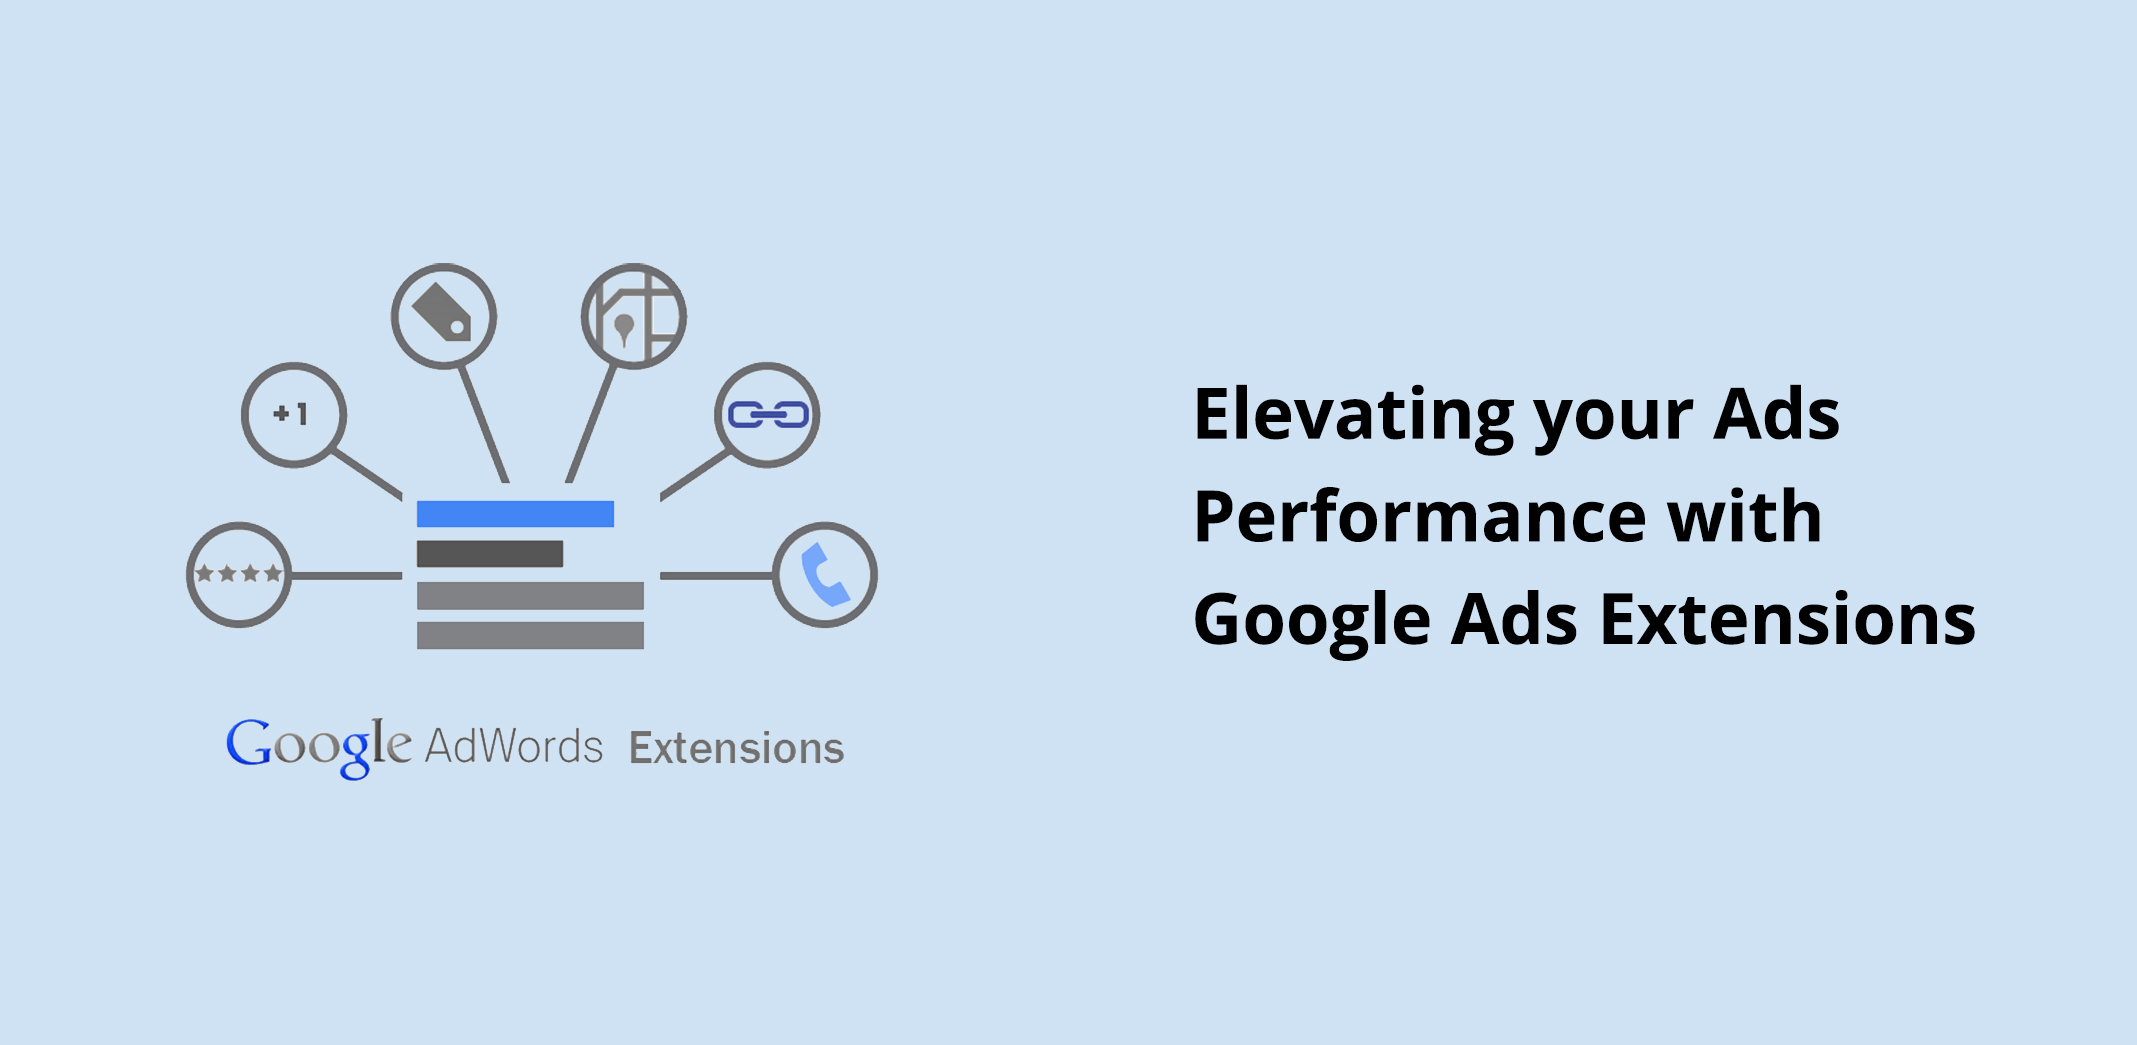 Elevating your Ads Performance with Google Ads Extensions